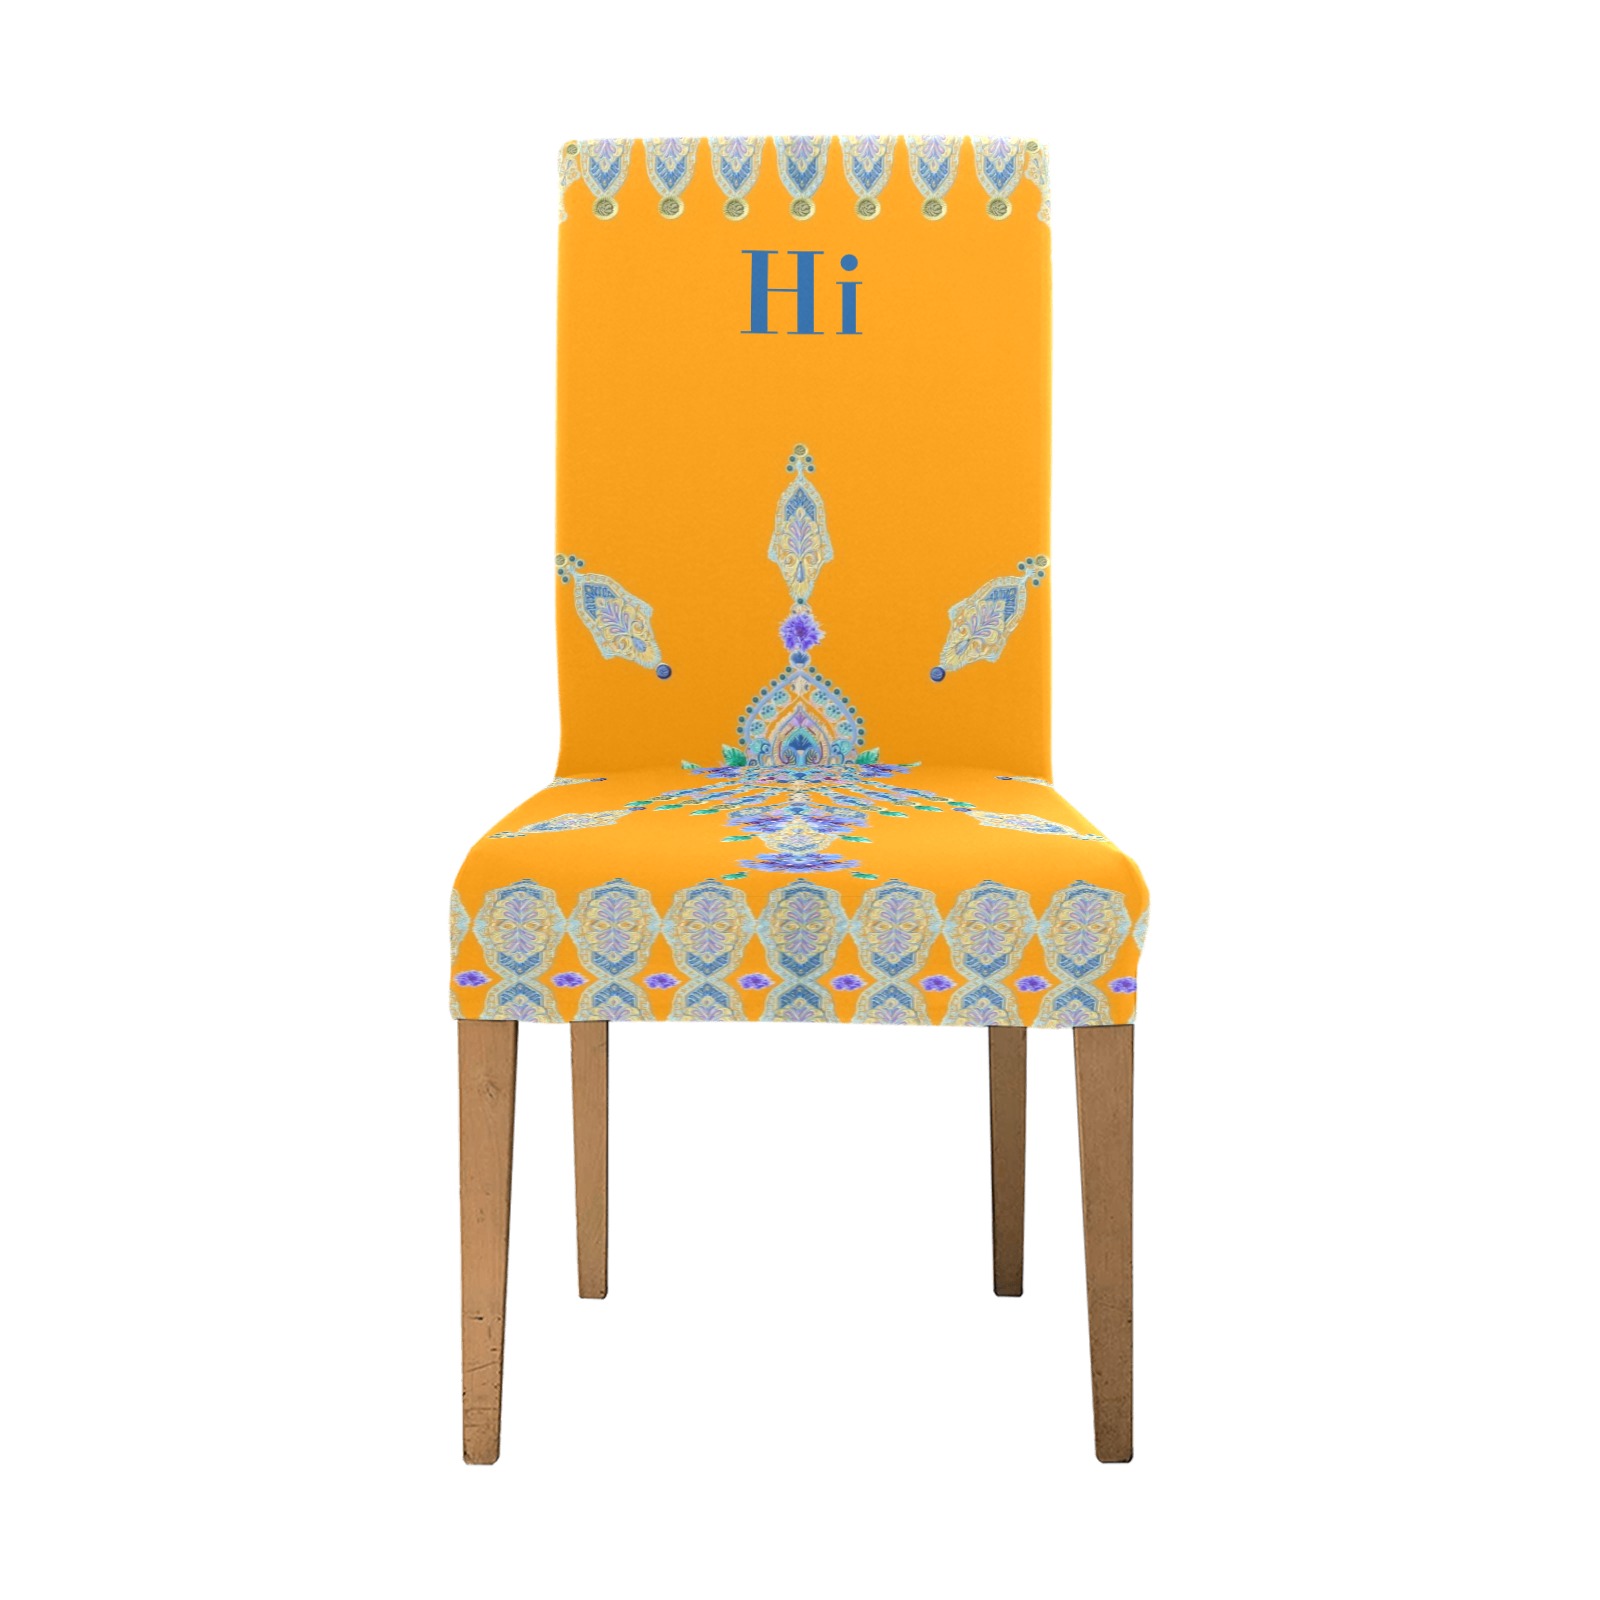 BLEUETS 12 hi Removable Dining Chair Cover